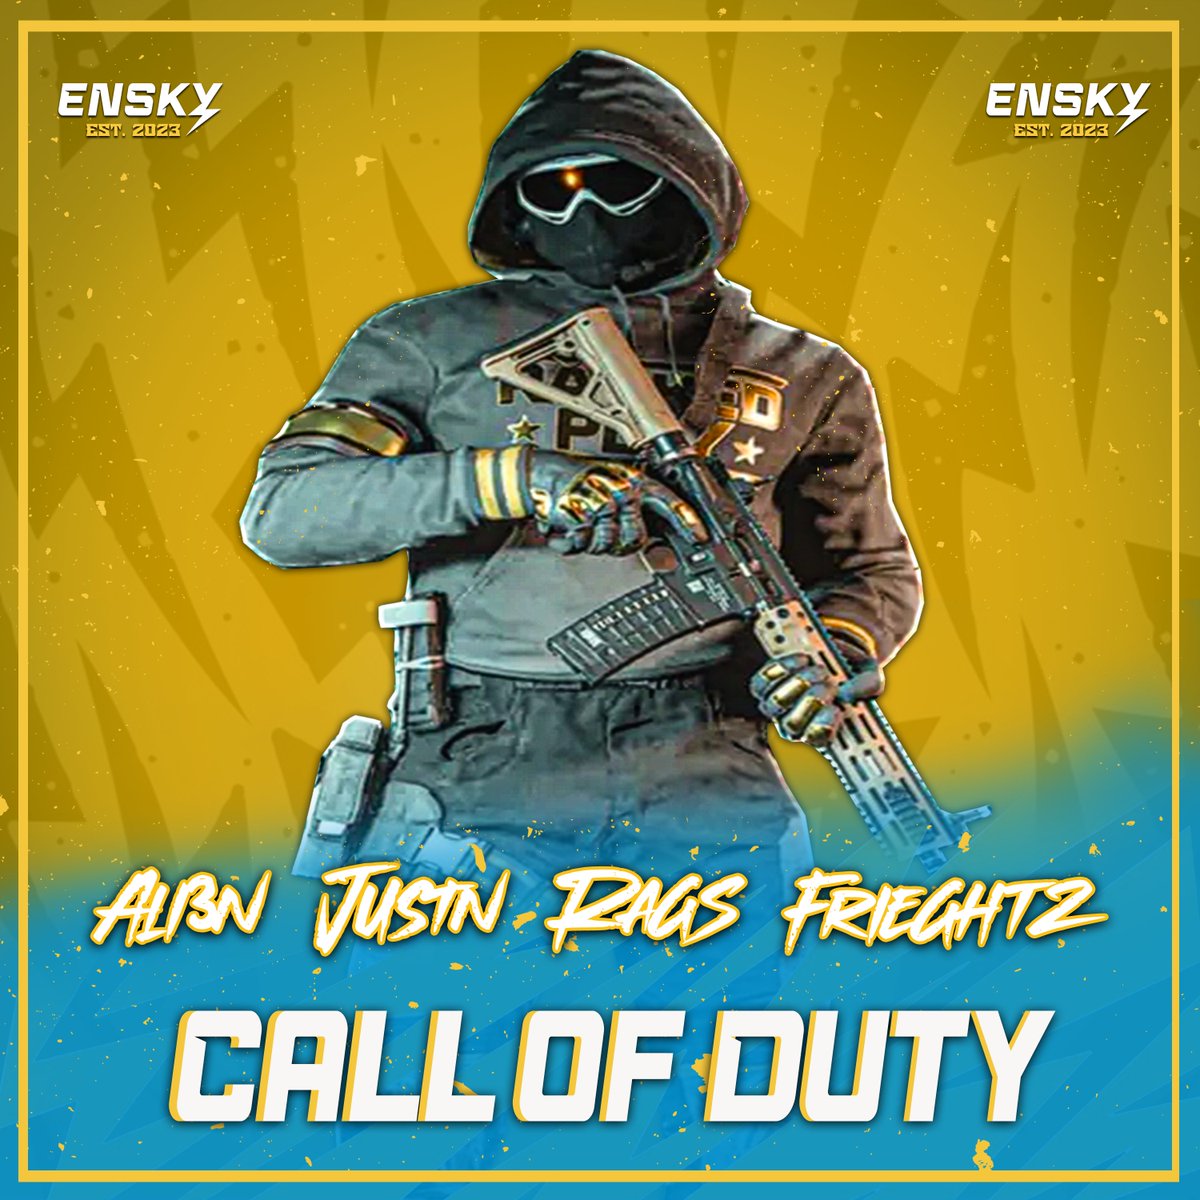 ⚡️ANNOUNCEMENT⚡️ Introducing the new eNsKy Gold #CallofDuty Roster! @The__ALI3N @JUSTN246 @Frieghtz @9Raggs They are currently in first place in the @CoDRecLeague & will be competing in the @XP_Leagues! Their @CoDRecLeague match starts at 10:30 EST! Watch live at…